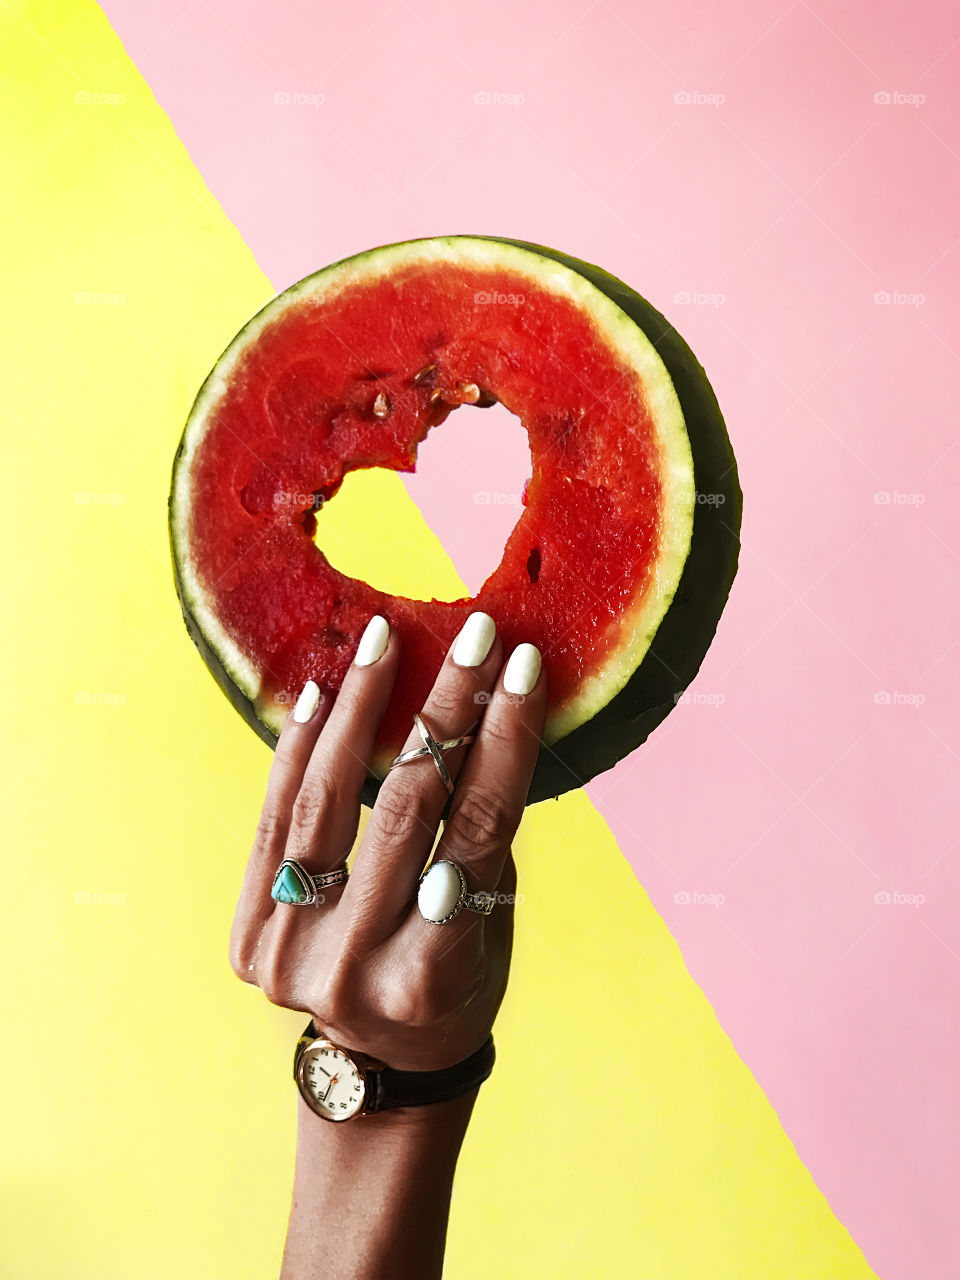 Female hand with white nails and fashionable rings and watches holding a slice of watermelon on colorful pastel background 